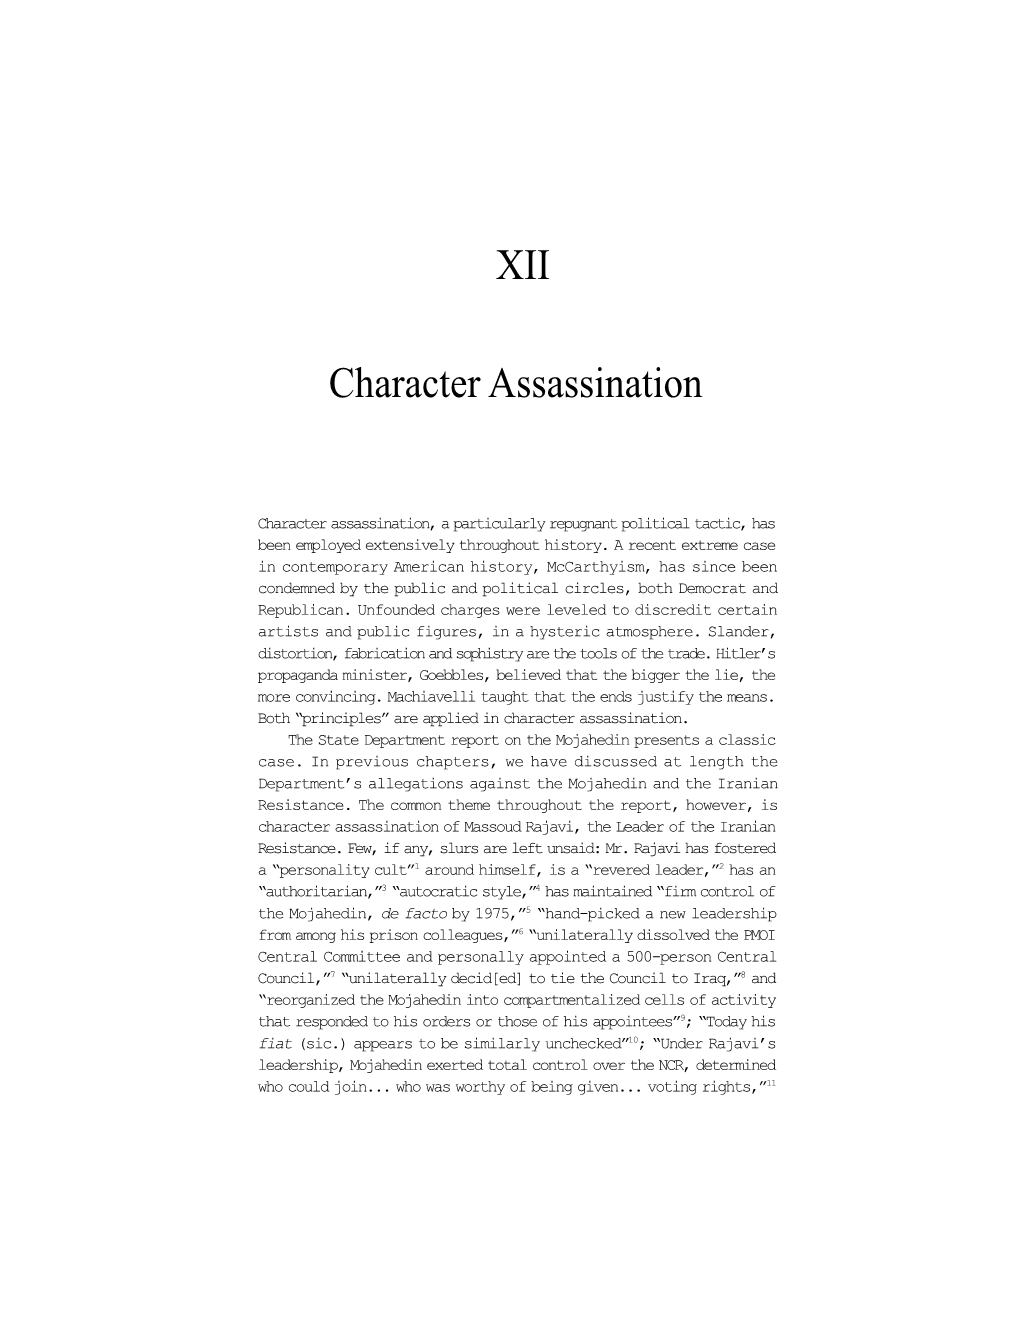 XII Character Assassination